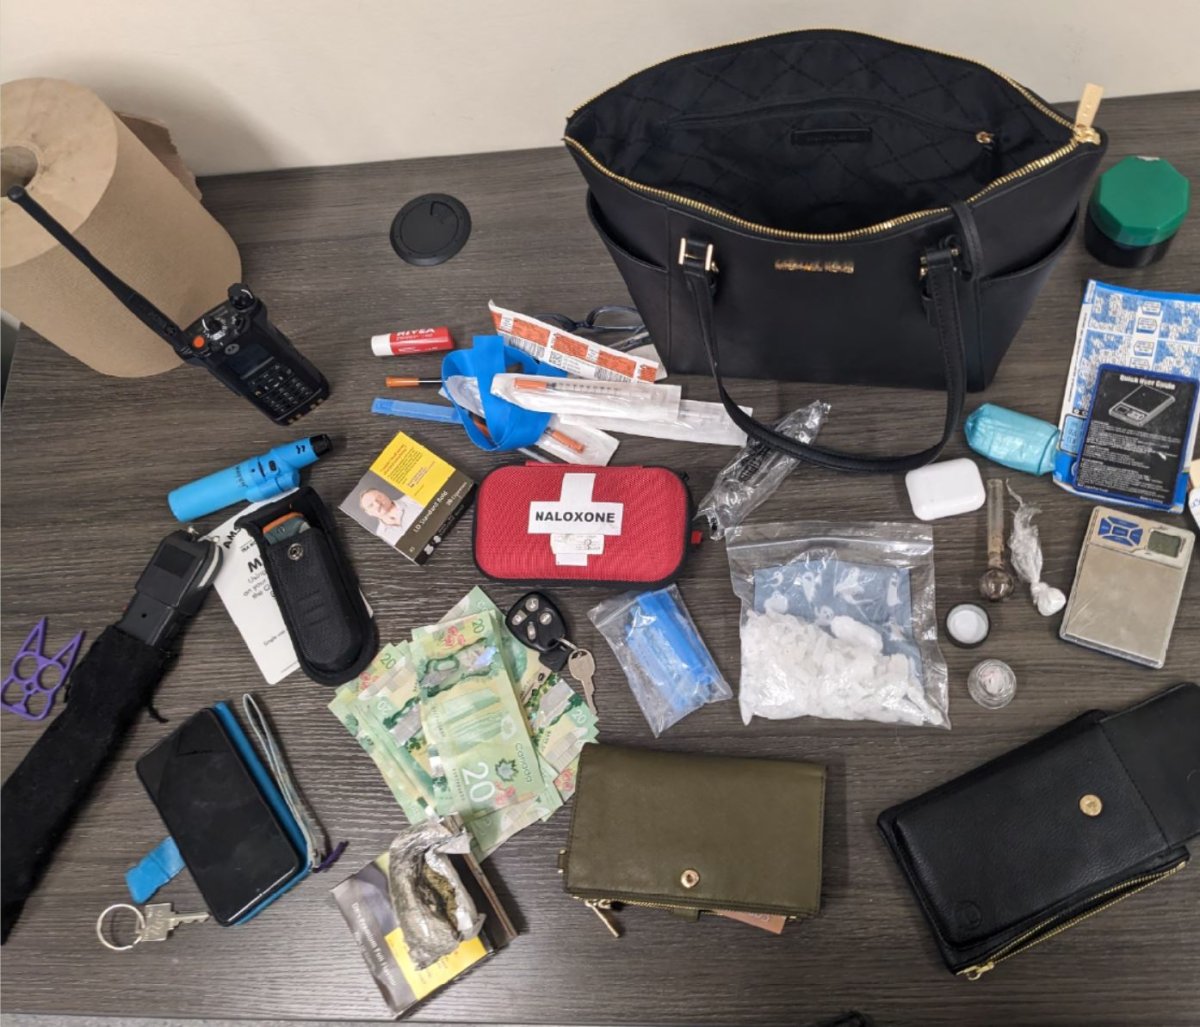 Portage la Prairie RCMP conducted a traffic stop on June 29, leading to the arrests of two individuals and seizure of various items, including cash and drug-related paraphernalia.